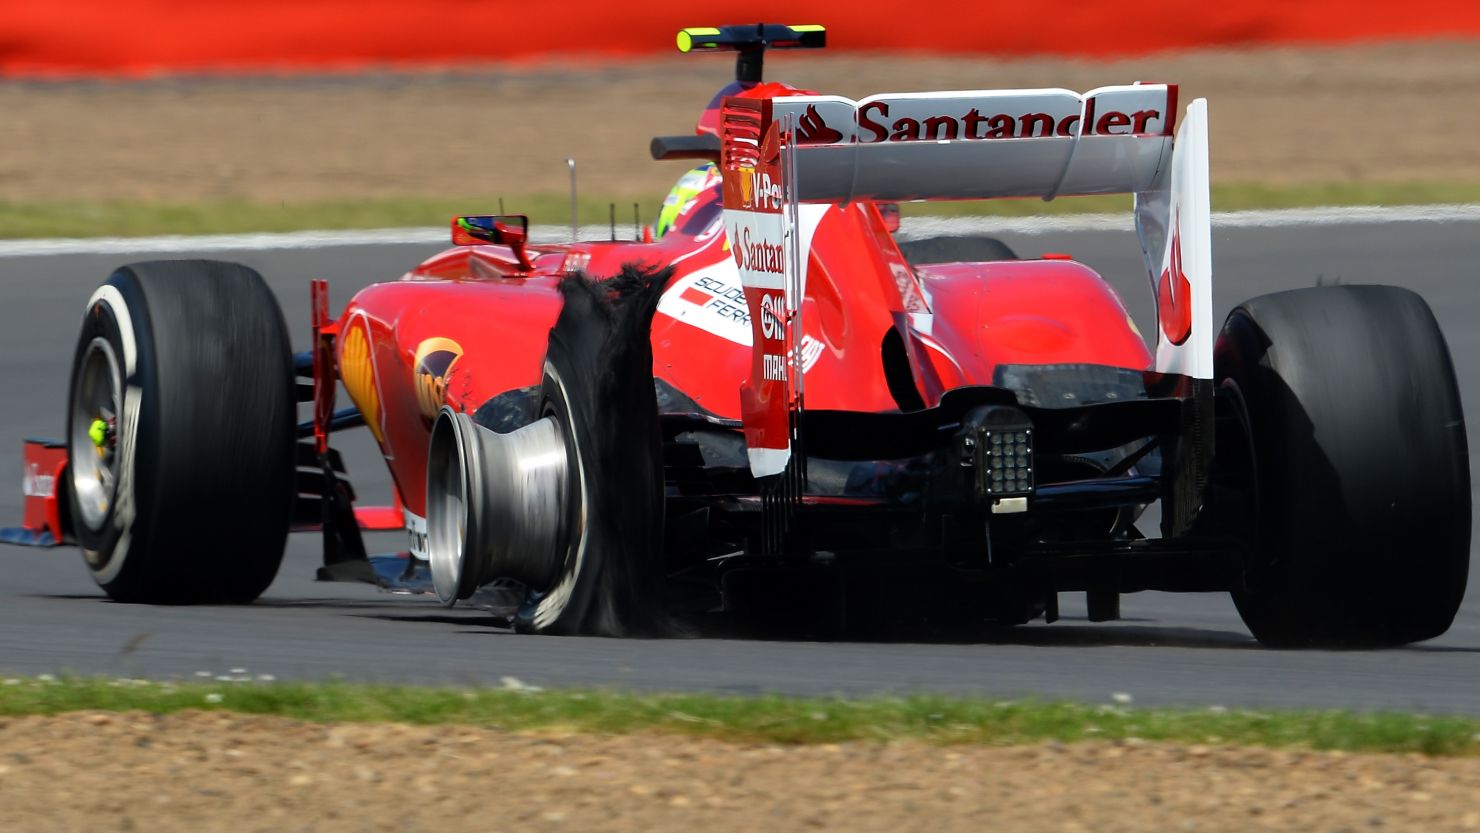 Pirelli says its tires are not to blame for the blow-outs that hit six drivers at the British Grand Prix